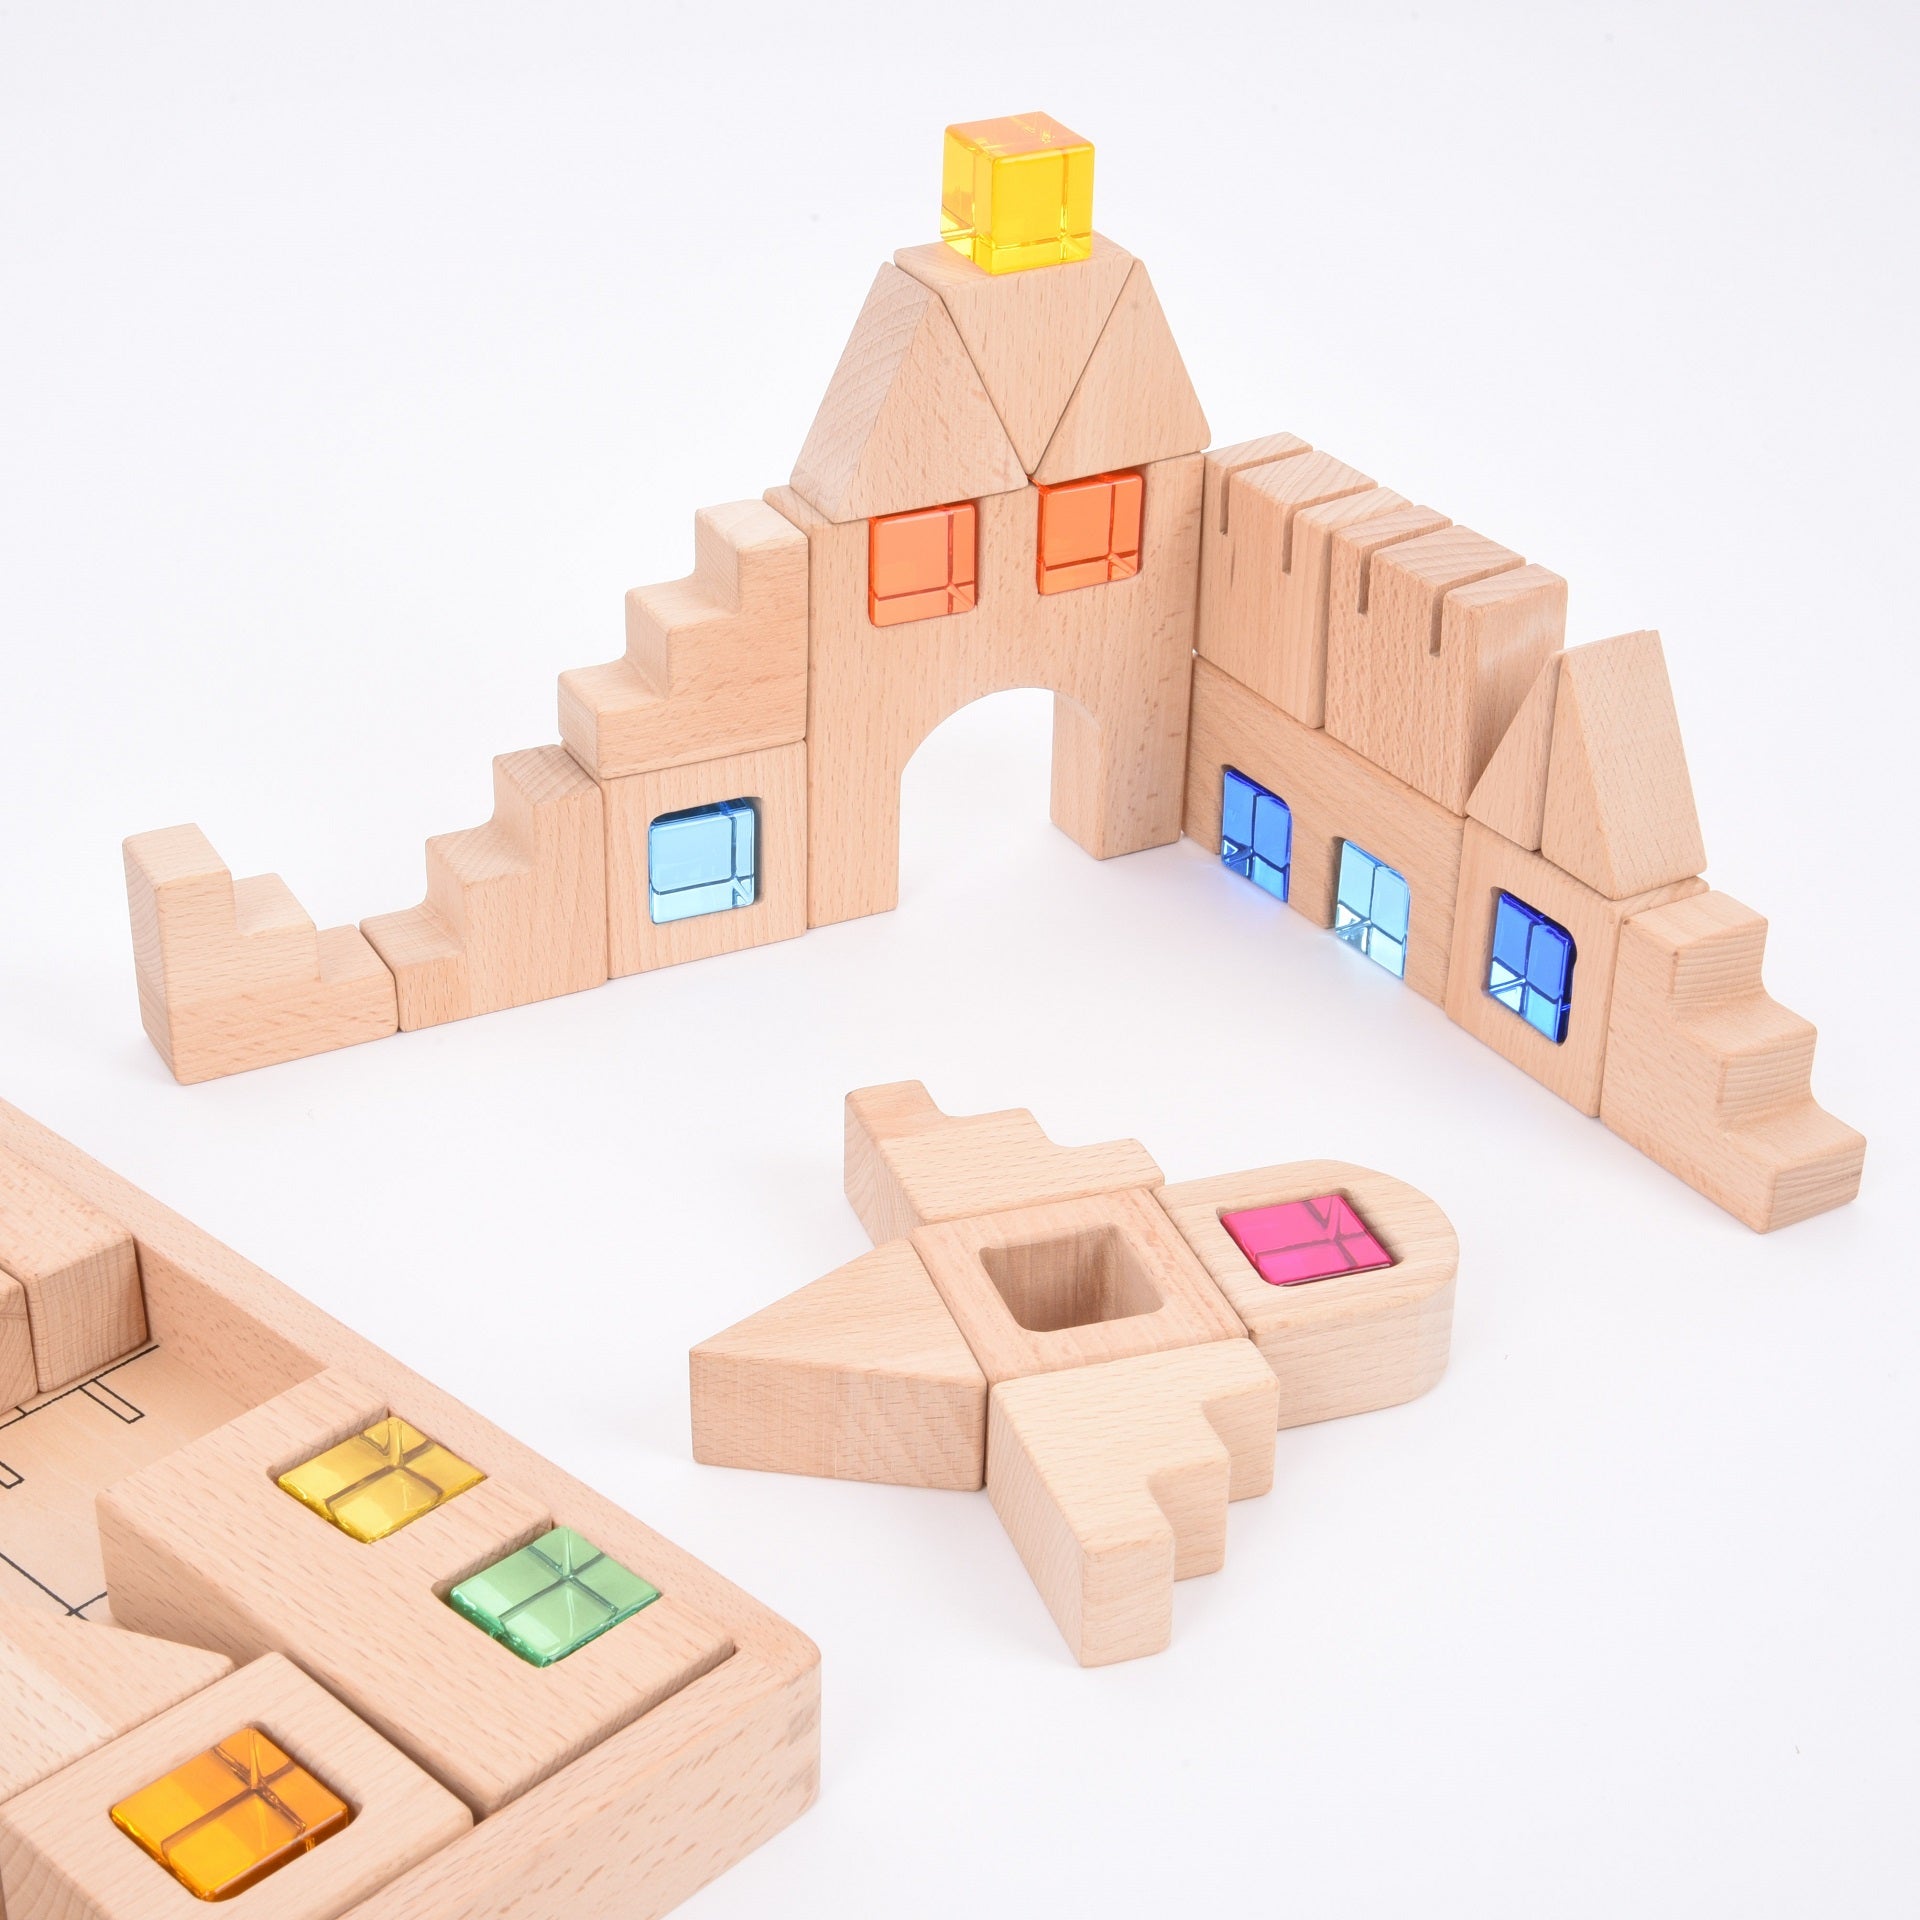 TickiT Wooden Building Gem Blocks, Creatively designed, our TickiT® Wooden Building Gem Blocks will encourage your child to use their limitless imagination, construct exciting structures, and learn through play! The smooth natural wooden blocks with crystal gem cube inserts give bursts of captivating colour, sparking your child's curiosity. The blocks are tactile and offer an open-ended approach for your child to have the freedom to use them however they choose. Older children can use their advanced creativ